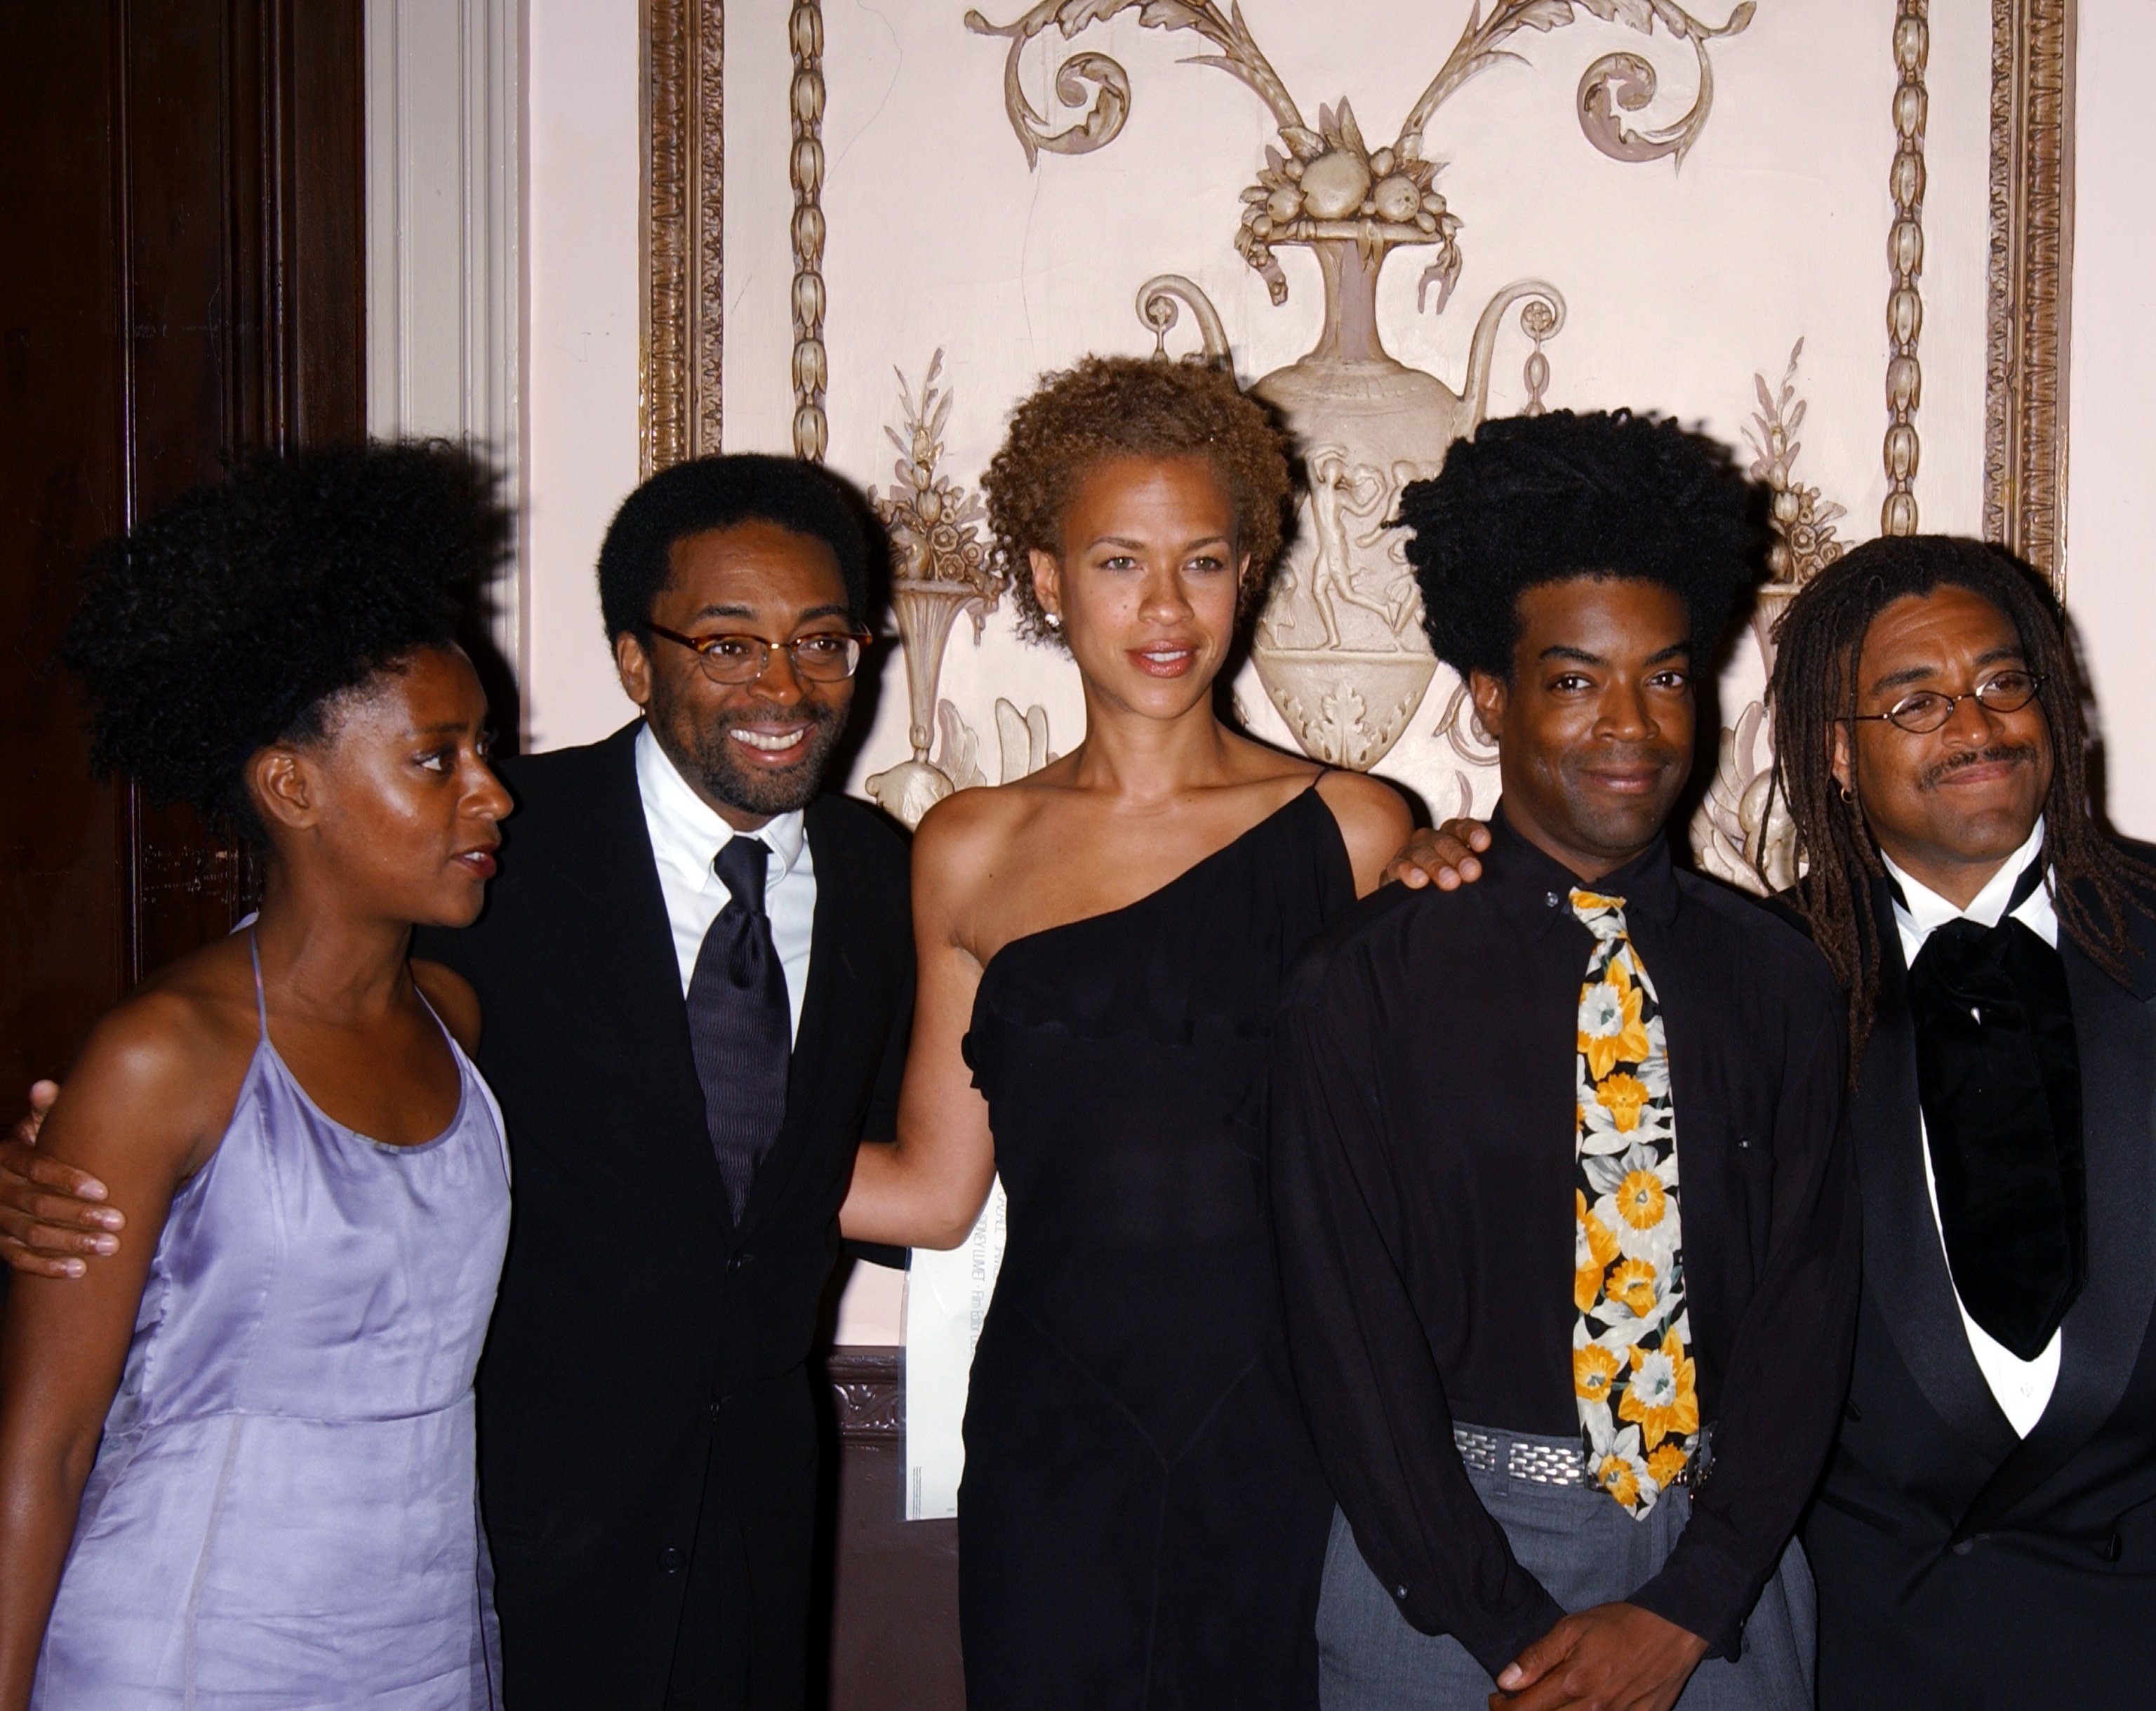 Spike Lee photographed together with sister Joie (left), hiswife Tonya, and brothers Cinque (2nd right) and David (right) during the third annual Directors Guild of America Honors dinner at the Waldorf-Astoria | Source: Getty Images